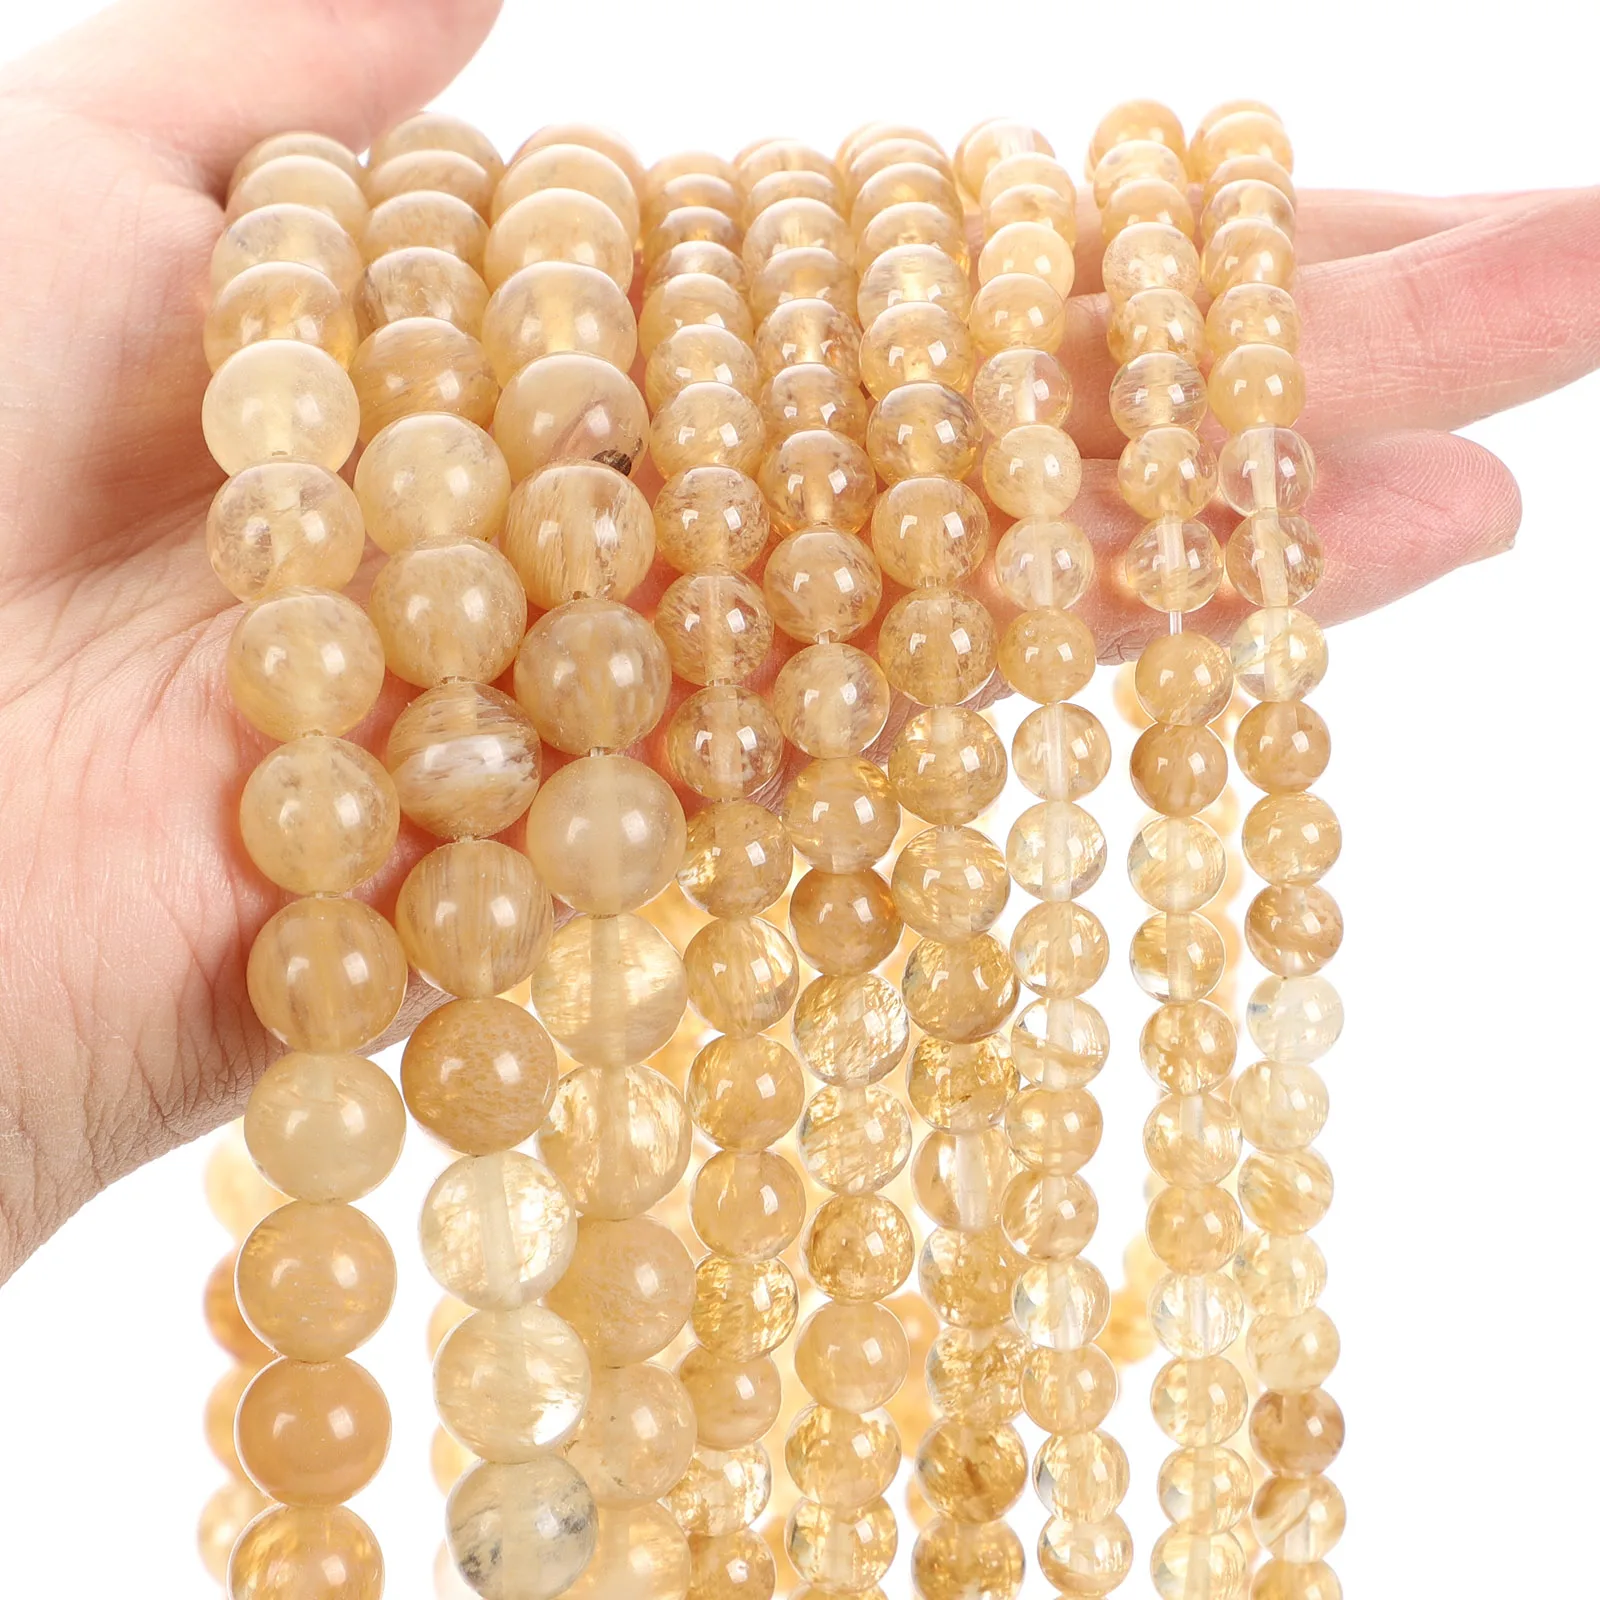 Yellow Watermelon Natural Stone Beads Round Citrines Quartzs Loose Spacer Bead For Jewelry Making DIY Charm Bracelet Necklace | Украшения и